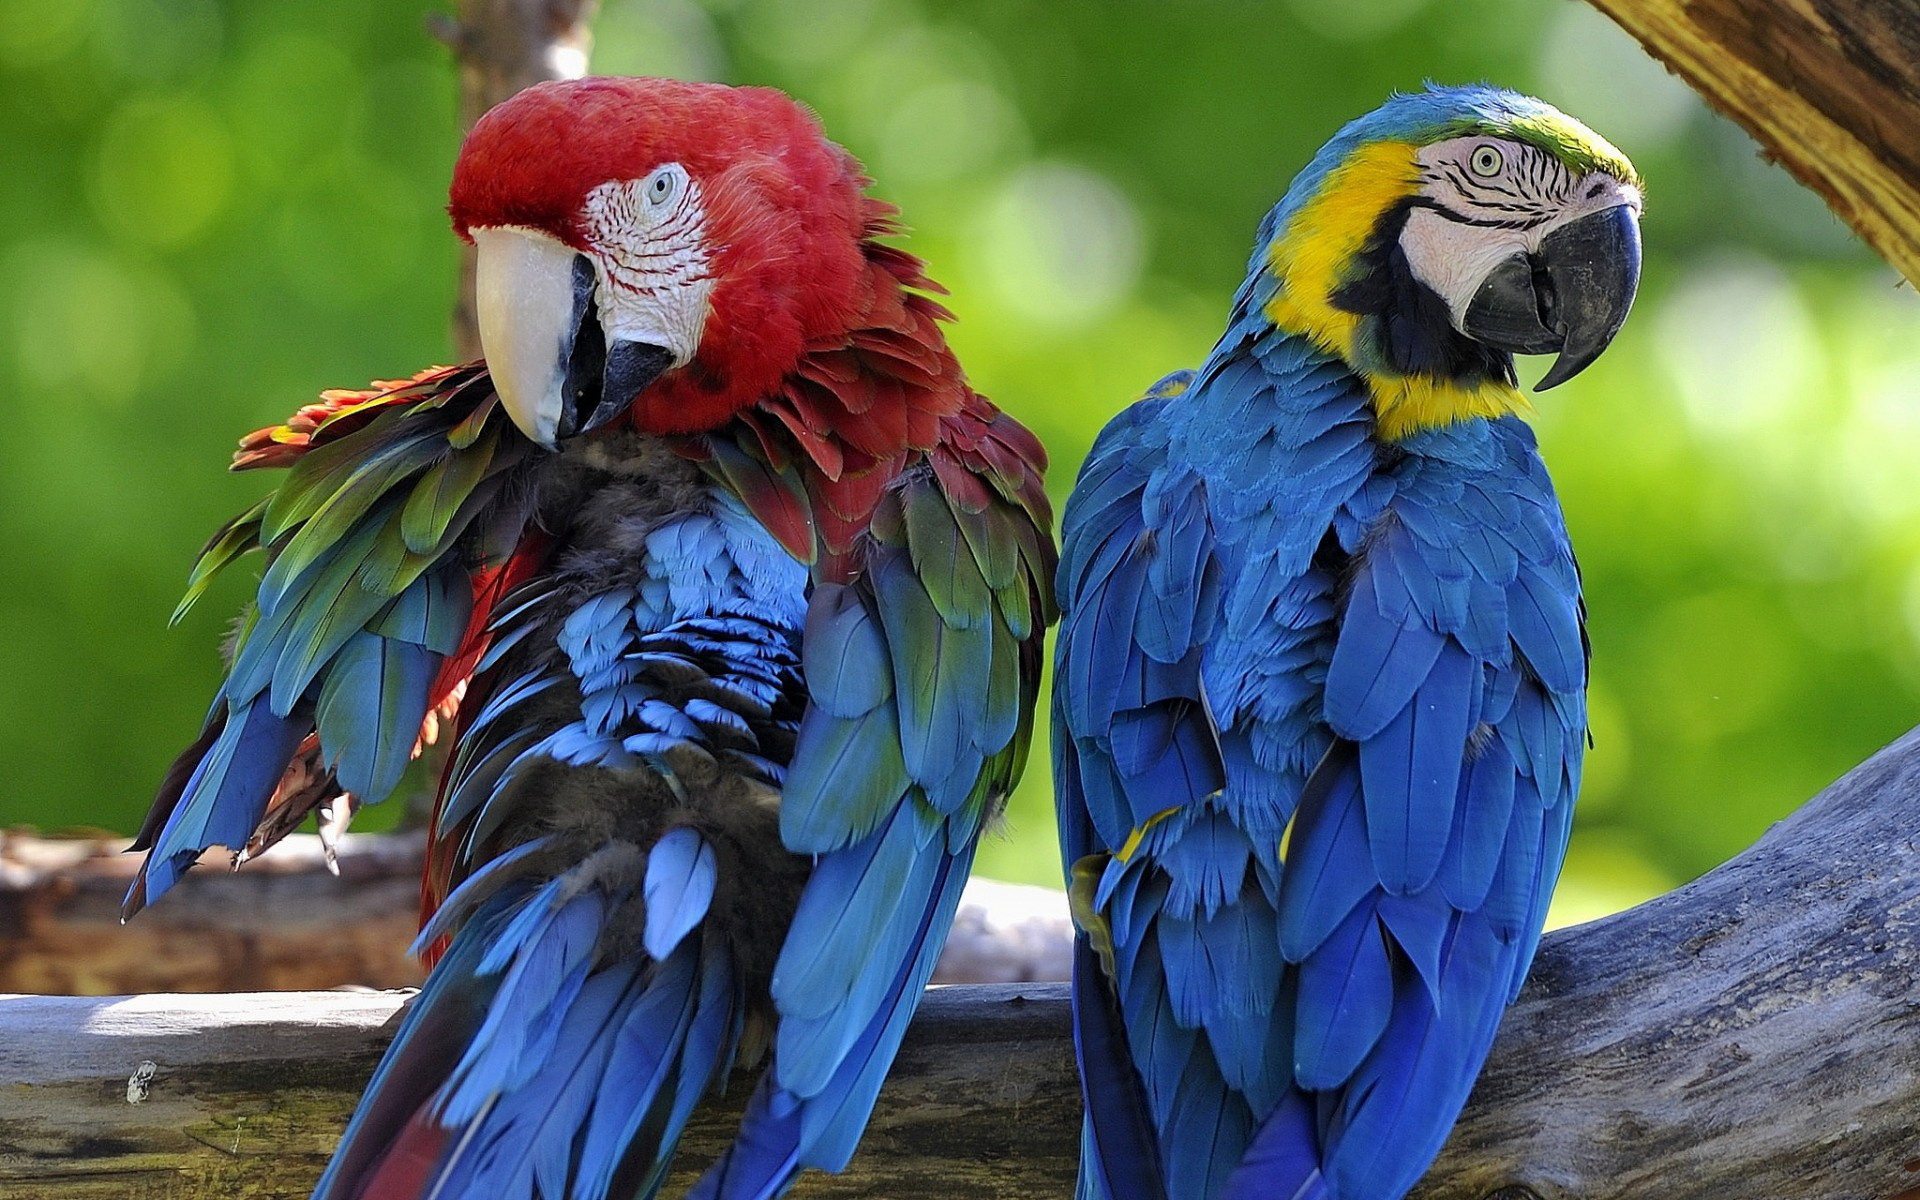 Full HD animal, macaw, bird, blue and yellow macaw, parrot, red and green macaw, birds